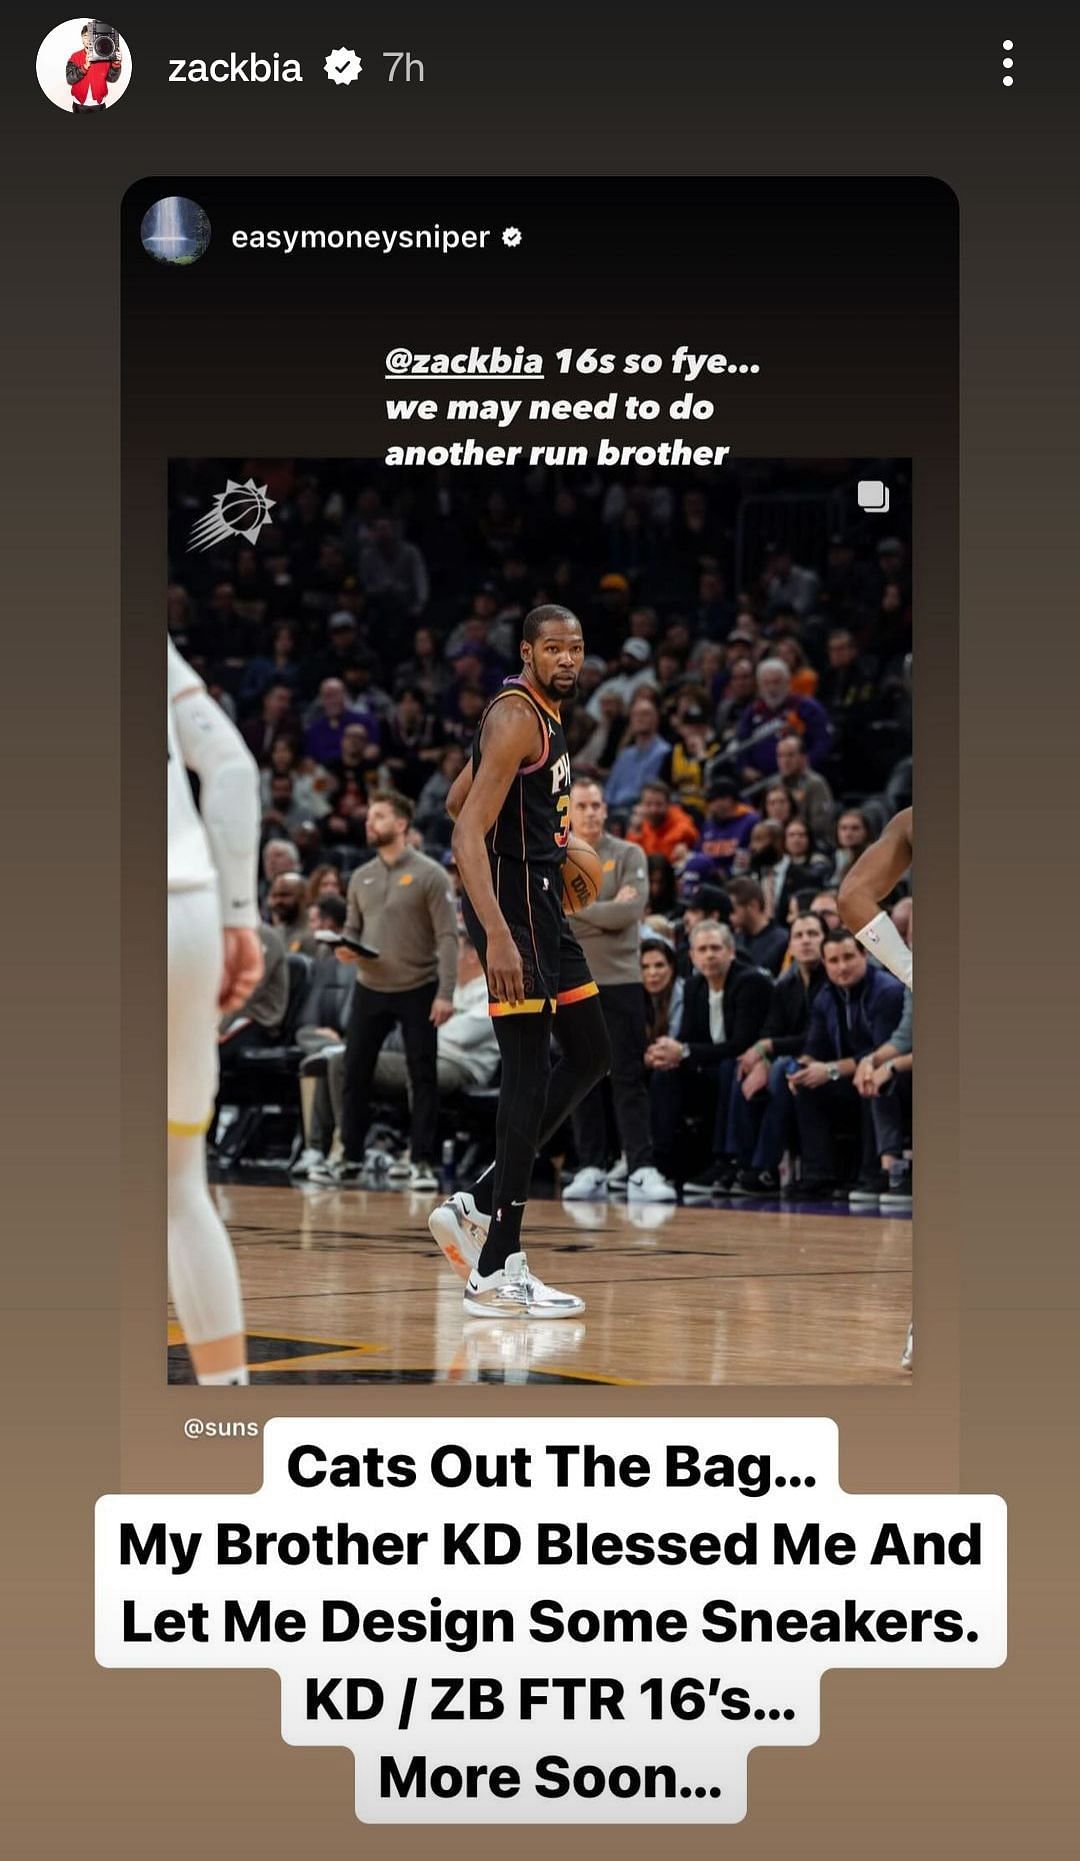 Zack Bia&#039;s reshare of Kevin Durant&#039;s Instagram story